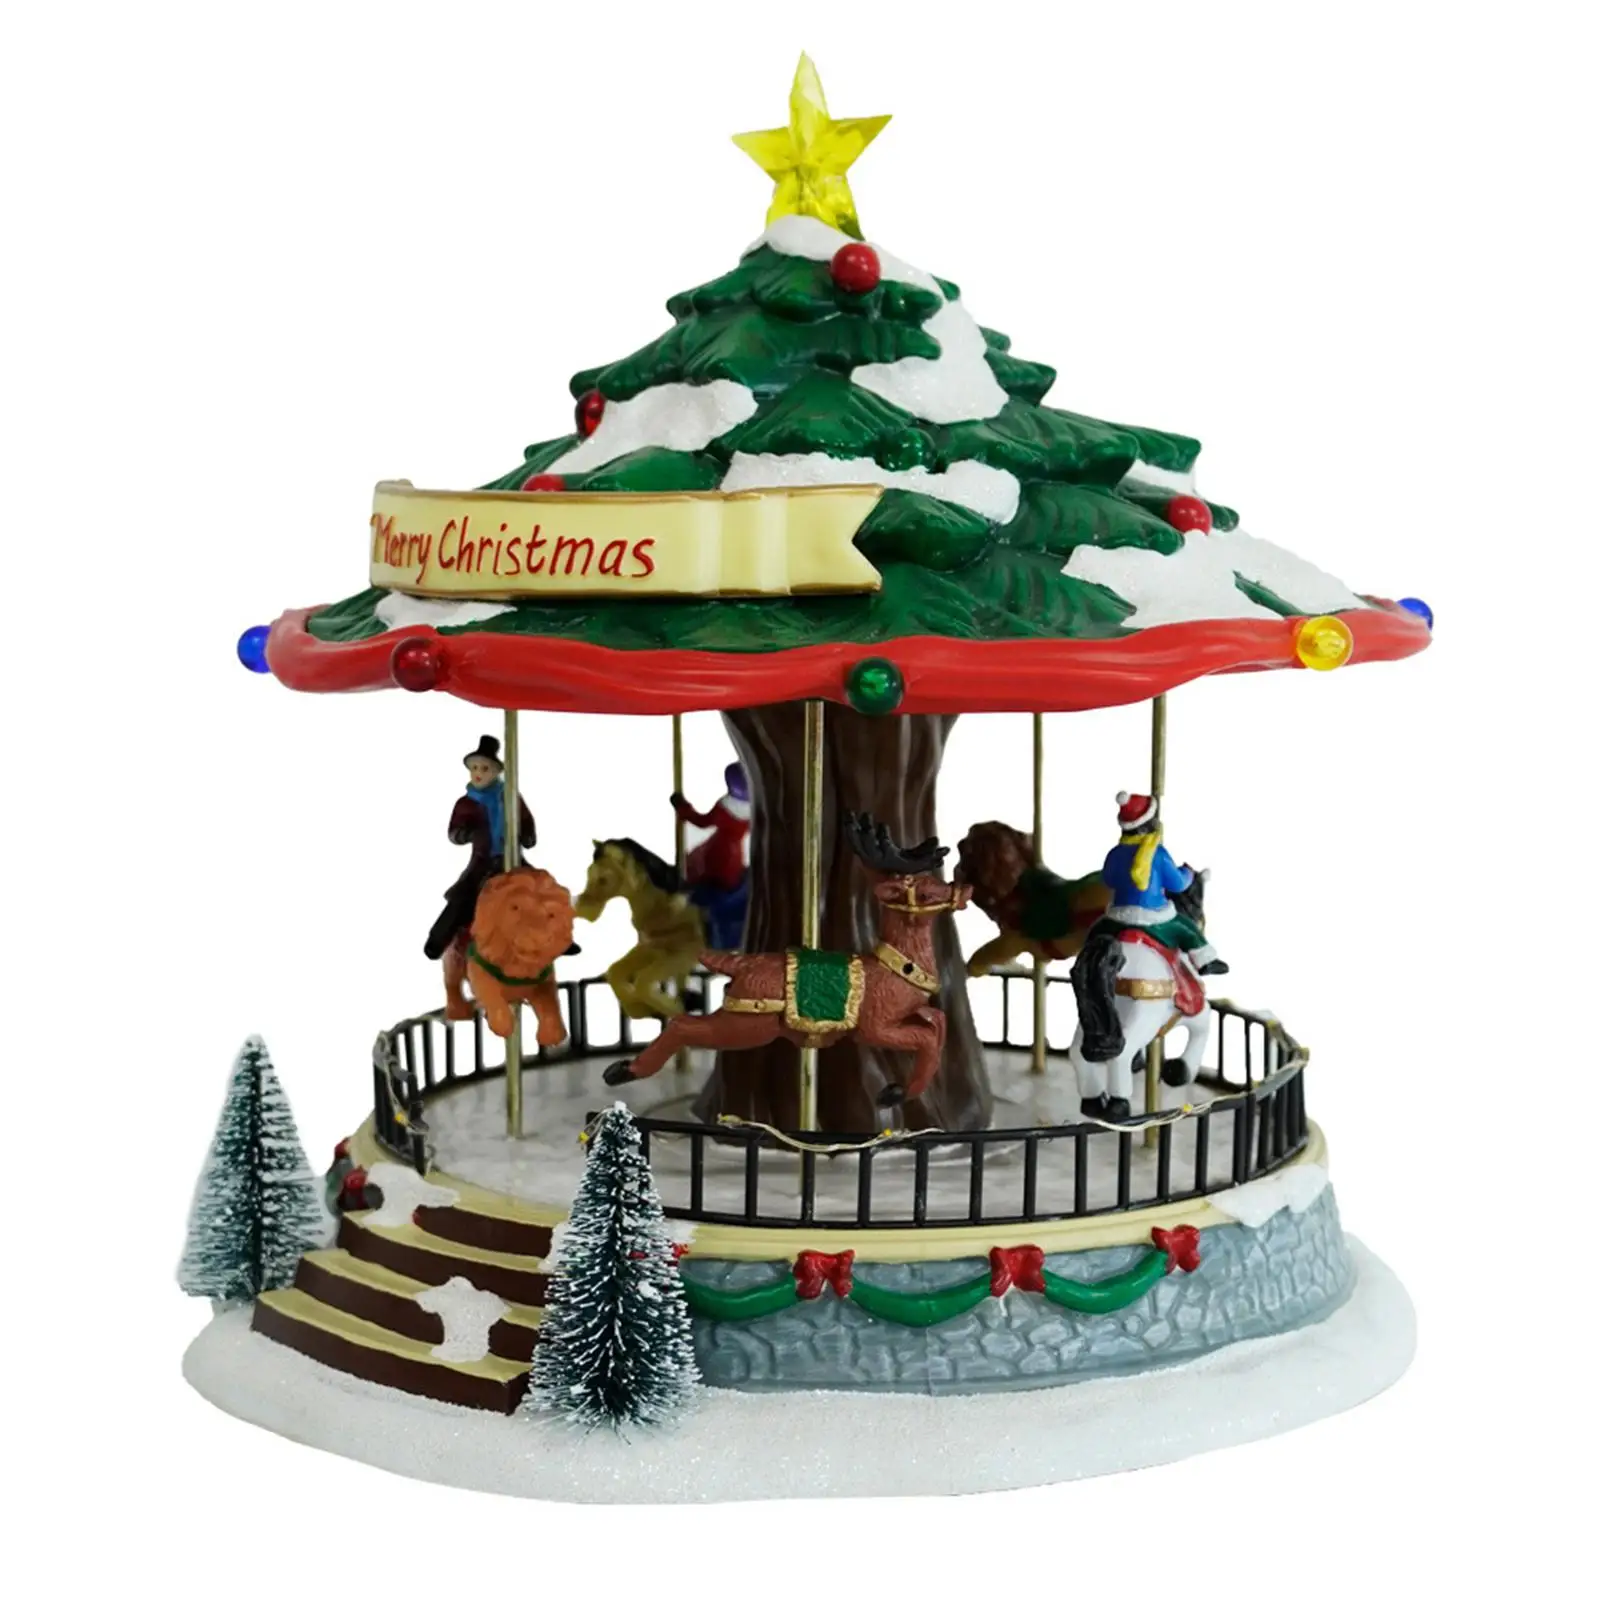 Lighted Christmas Carousel Music Box Carousel Statue Decorative Musical Box Tabletop Ornament for Holiday Indoor Home Decor